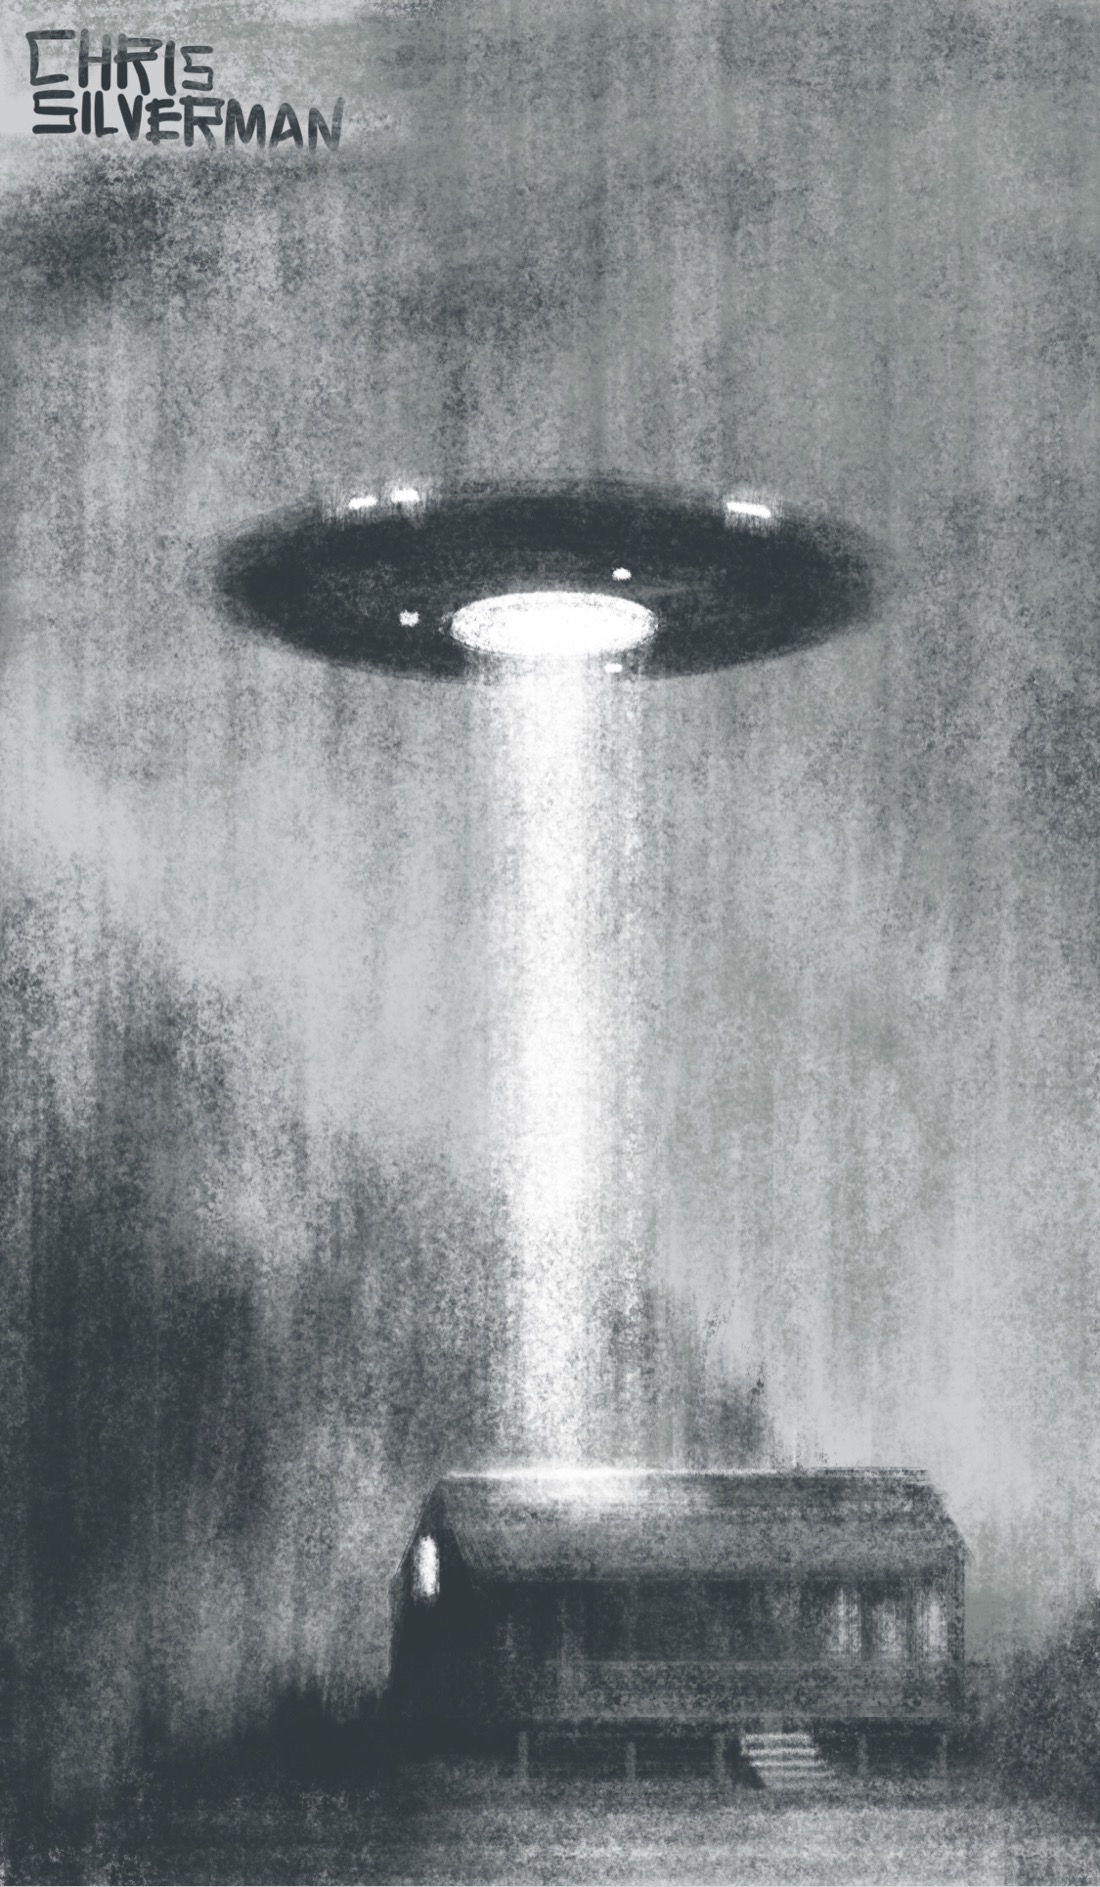 A black and white charcoal rendering of a small cabin in a clearing, surrounded by trees. It is a foggy night. Hovering above the cabin is a large, black, saucer-shaped spaceship. In the center of the underside is a glowing white opening from which a straight beam of light extends down, illuminating the roof of the cabin. The saucer has a few smaller, glowing lights on the sides and undersides as well.